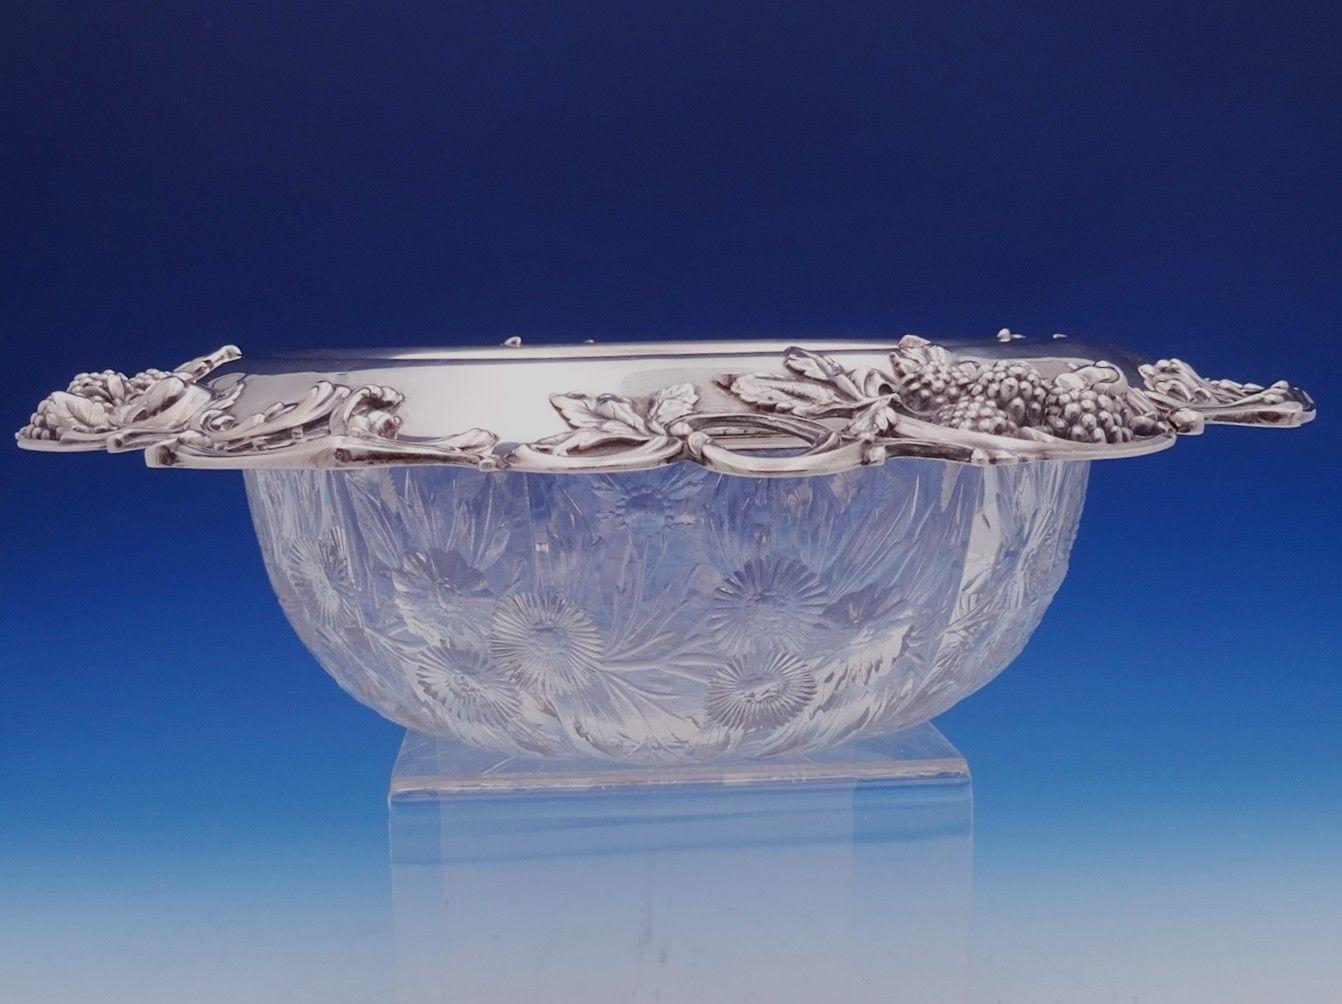 American Blackberry by Tiffany & Co. Sterling Silver Fruit Bowl with Cut Glass Leaves